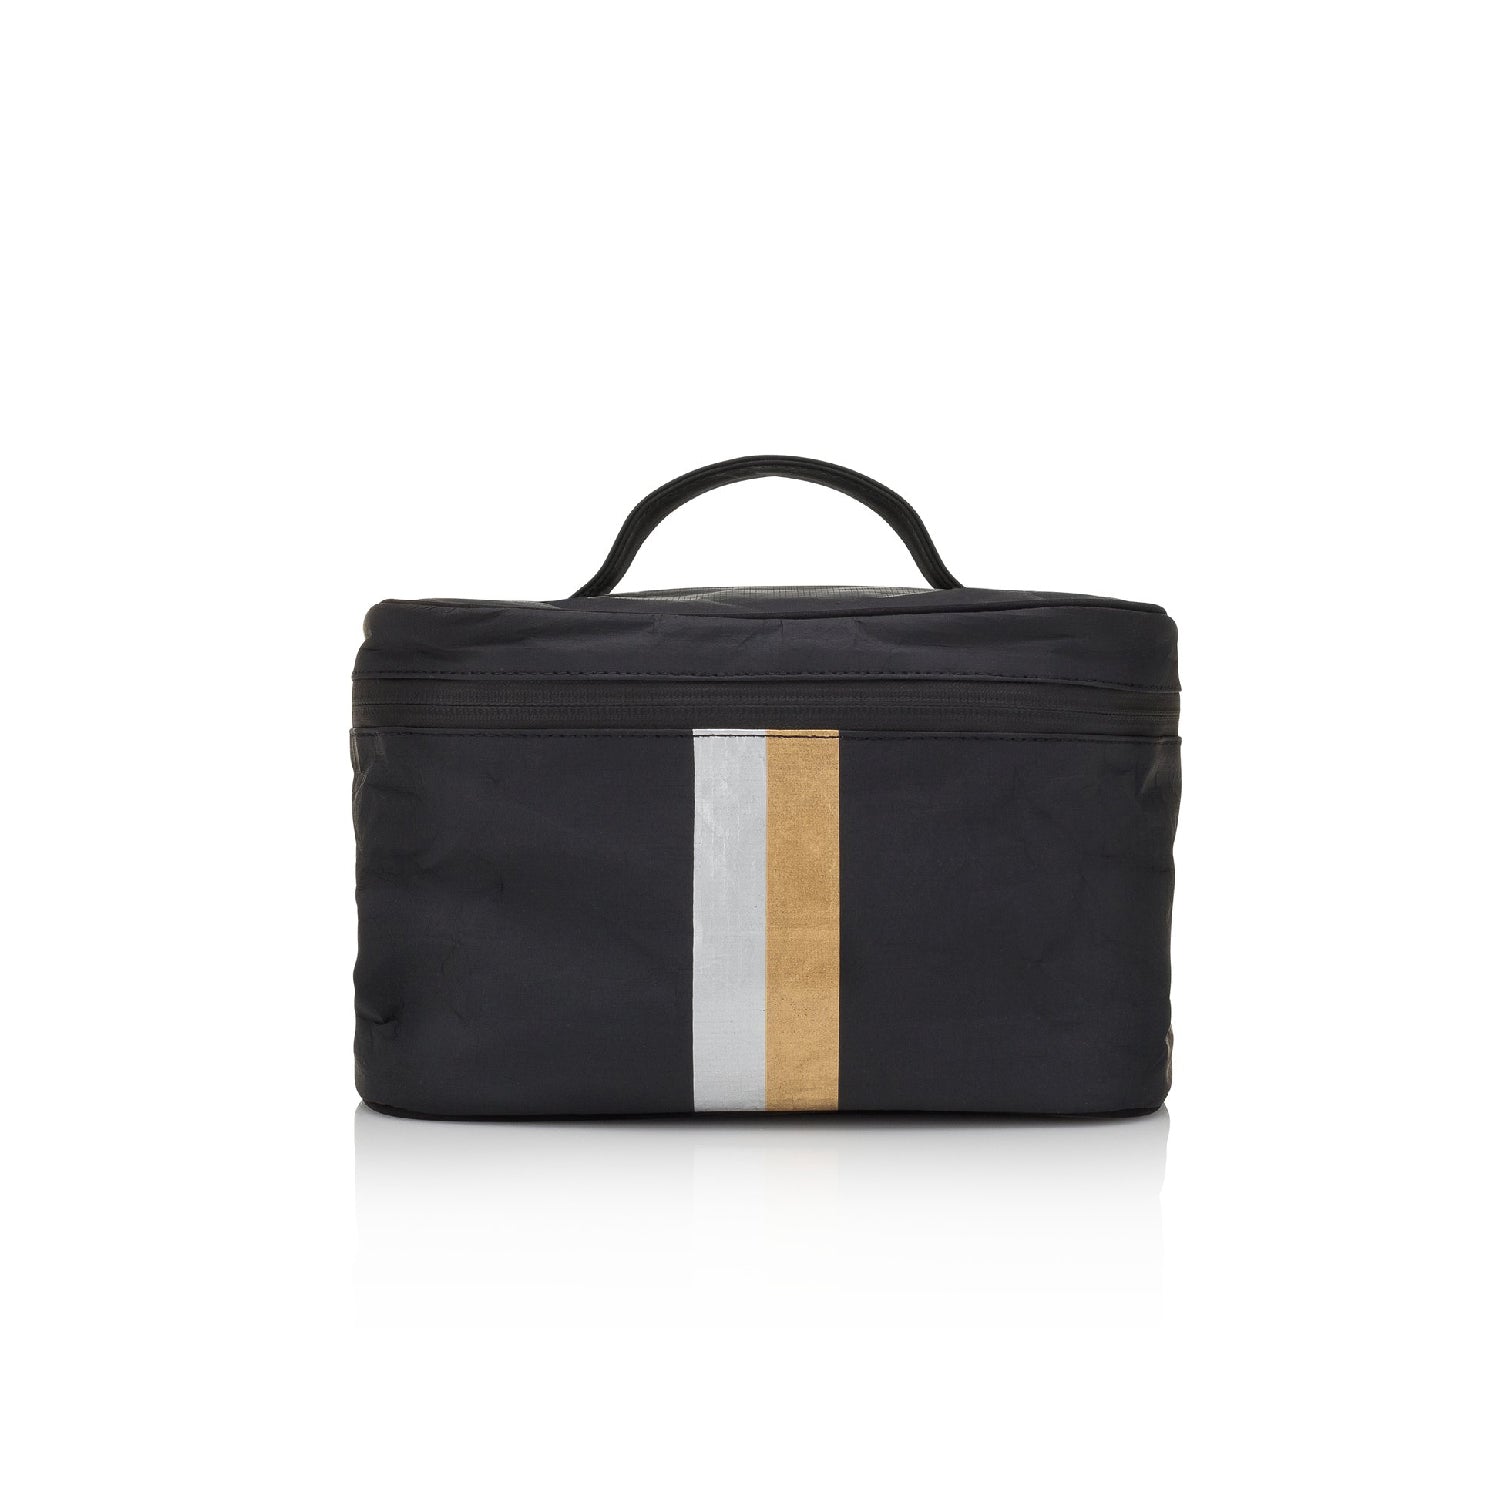 Hi Love Cute Cosmetic Case - Lunch Box - Black with Metallic Silver and Gold Stripes